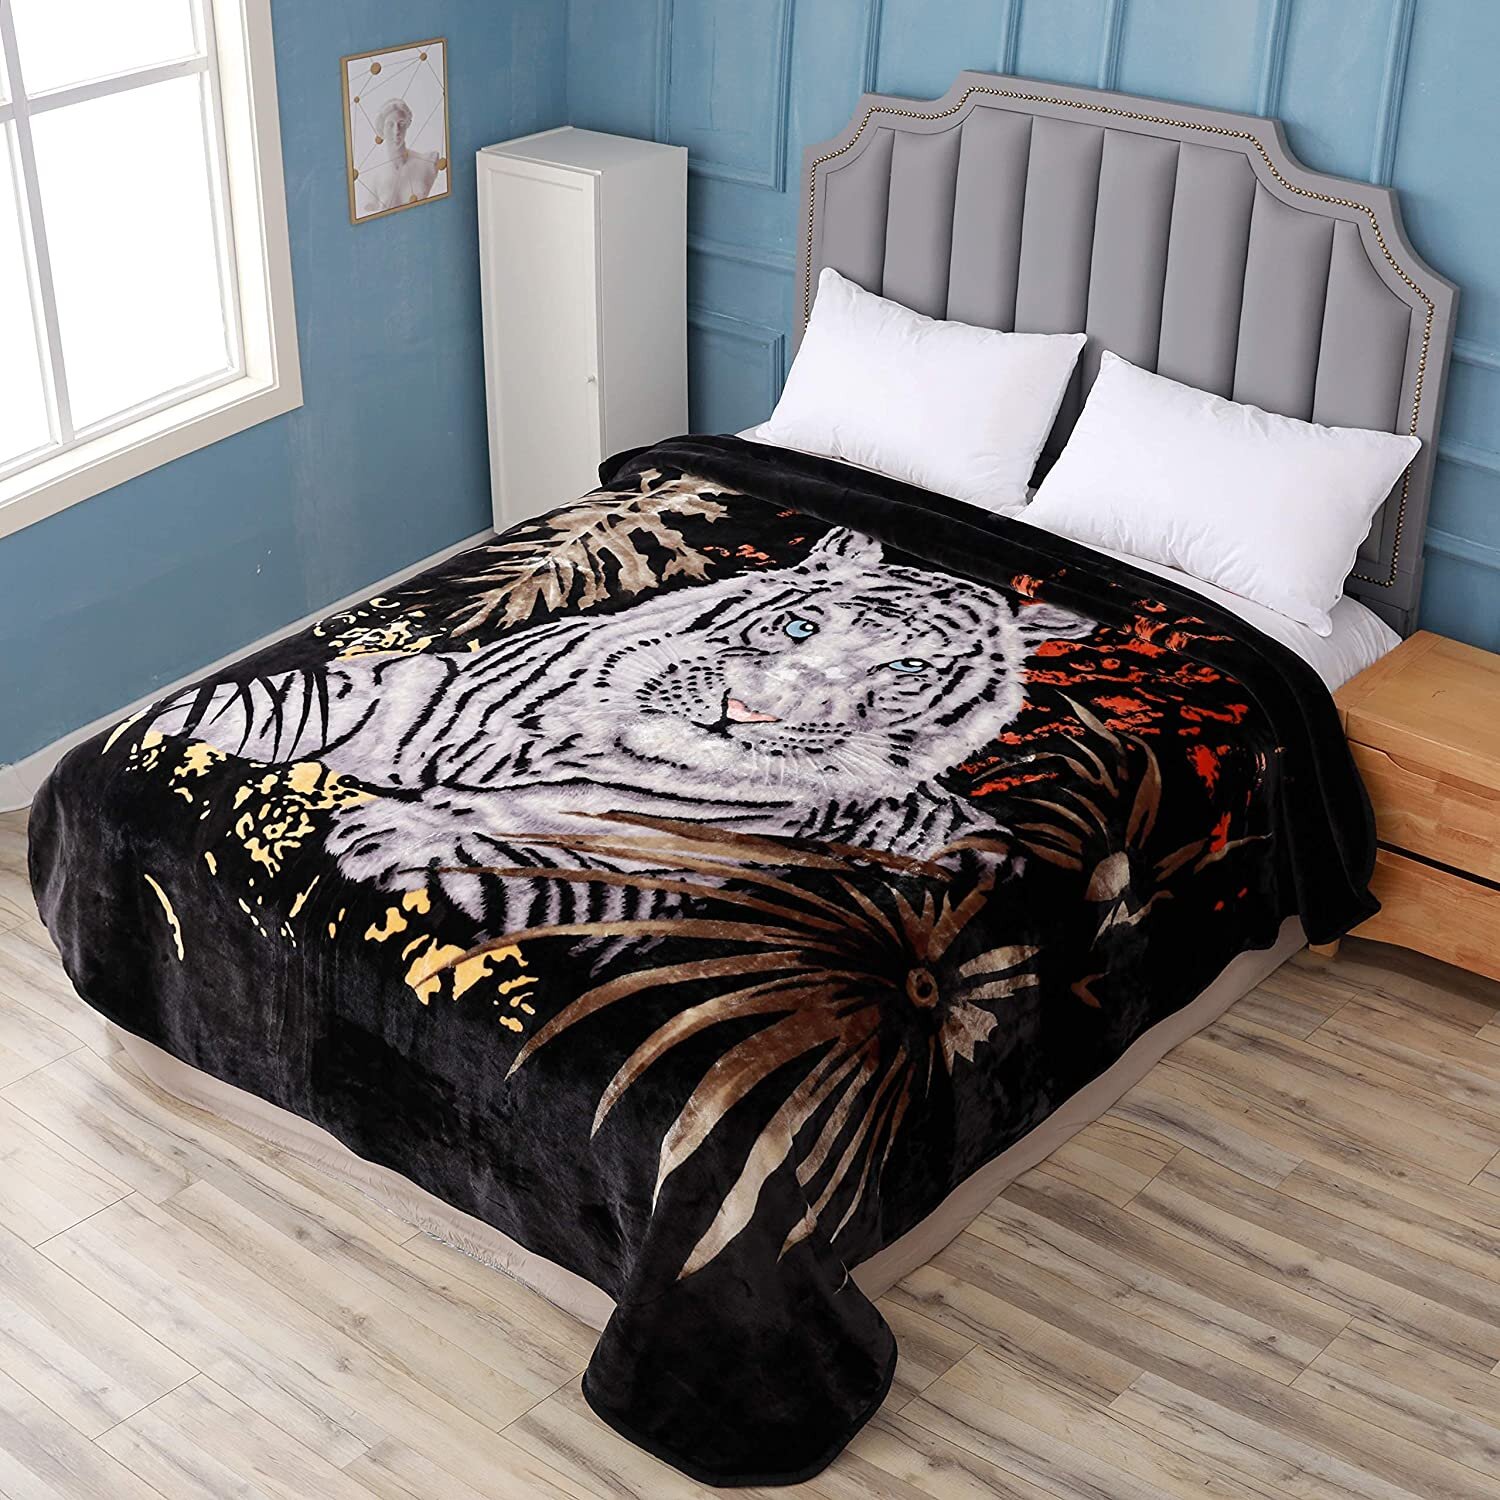 AUUXVA TFONE Japanese Tiger Patch Embroidery Pattern Throw Blanket Super Soft Cozy Luxury Lightweight Velvet Decor Throw Blanket for Couch Sofa Bed 1 Pack 60 x 90 inch Long 